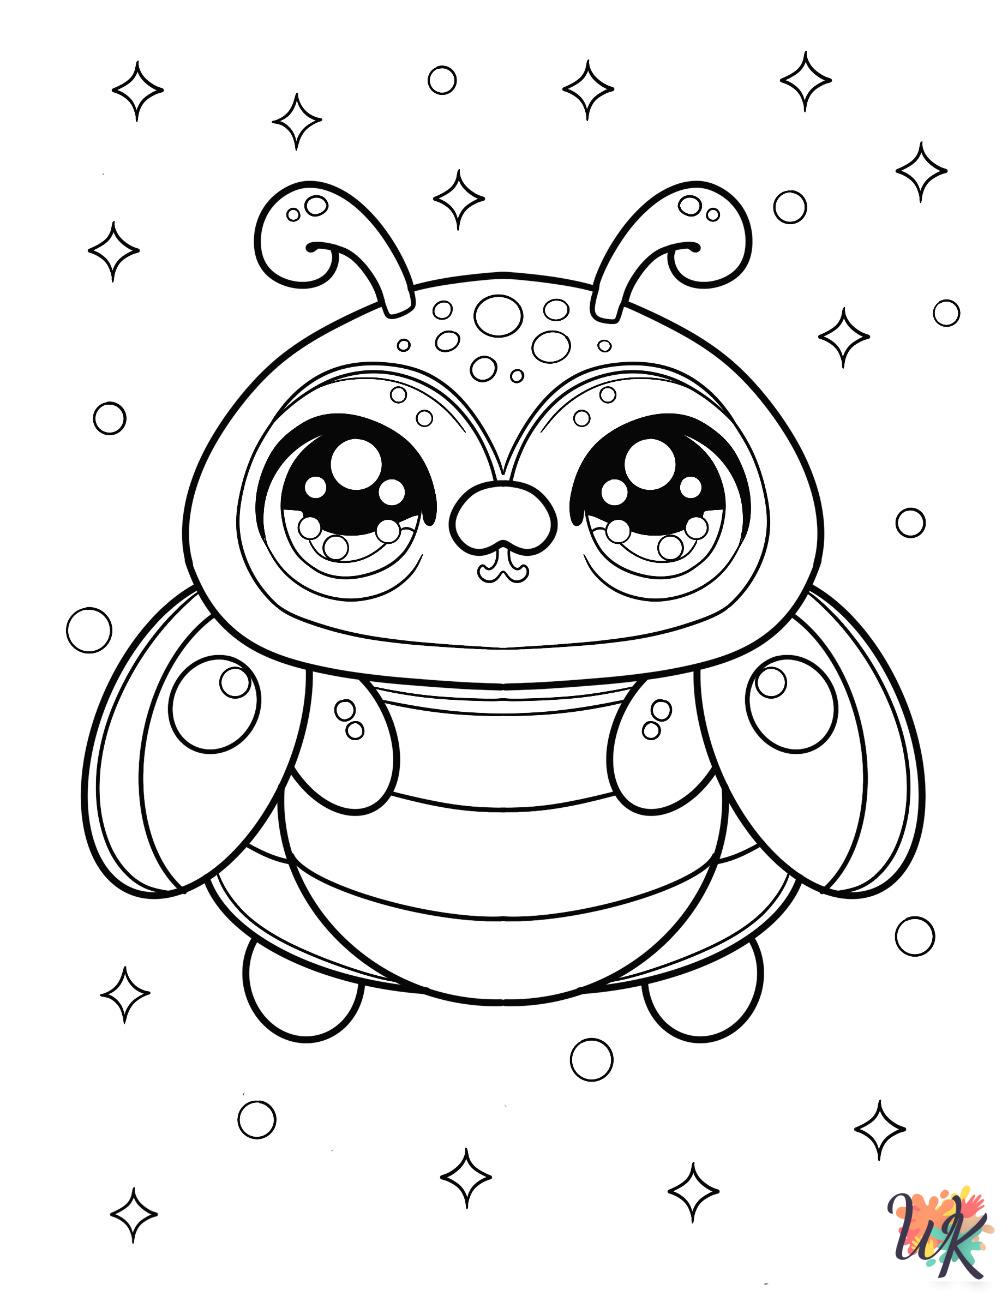 Beetle coloring pages for preschoolers